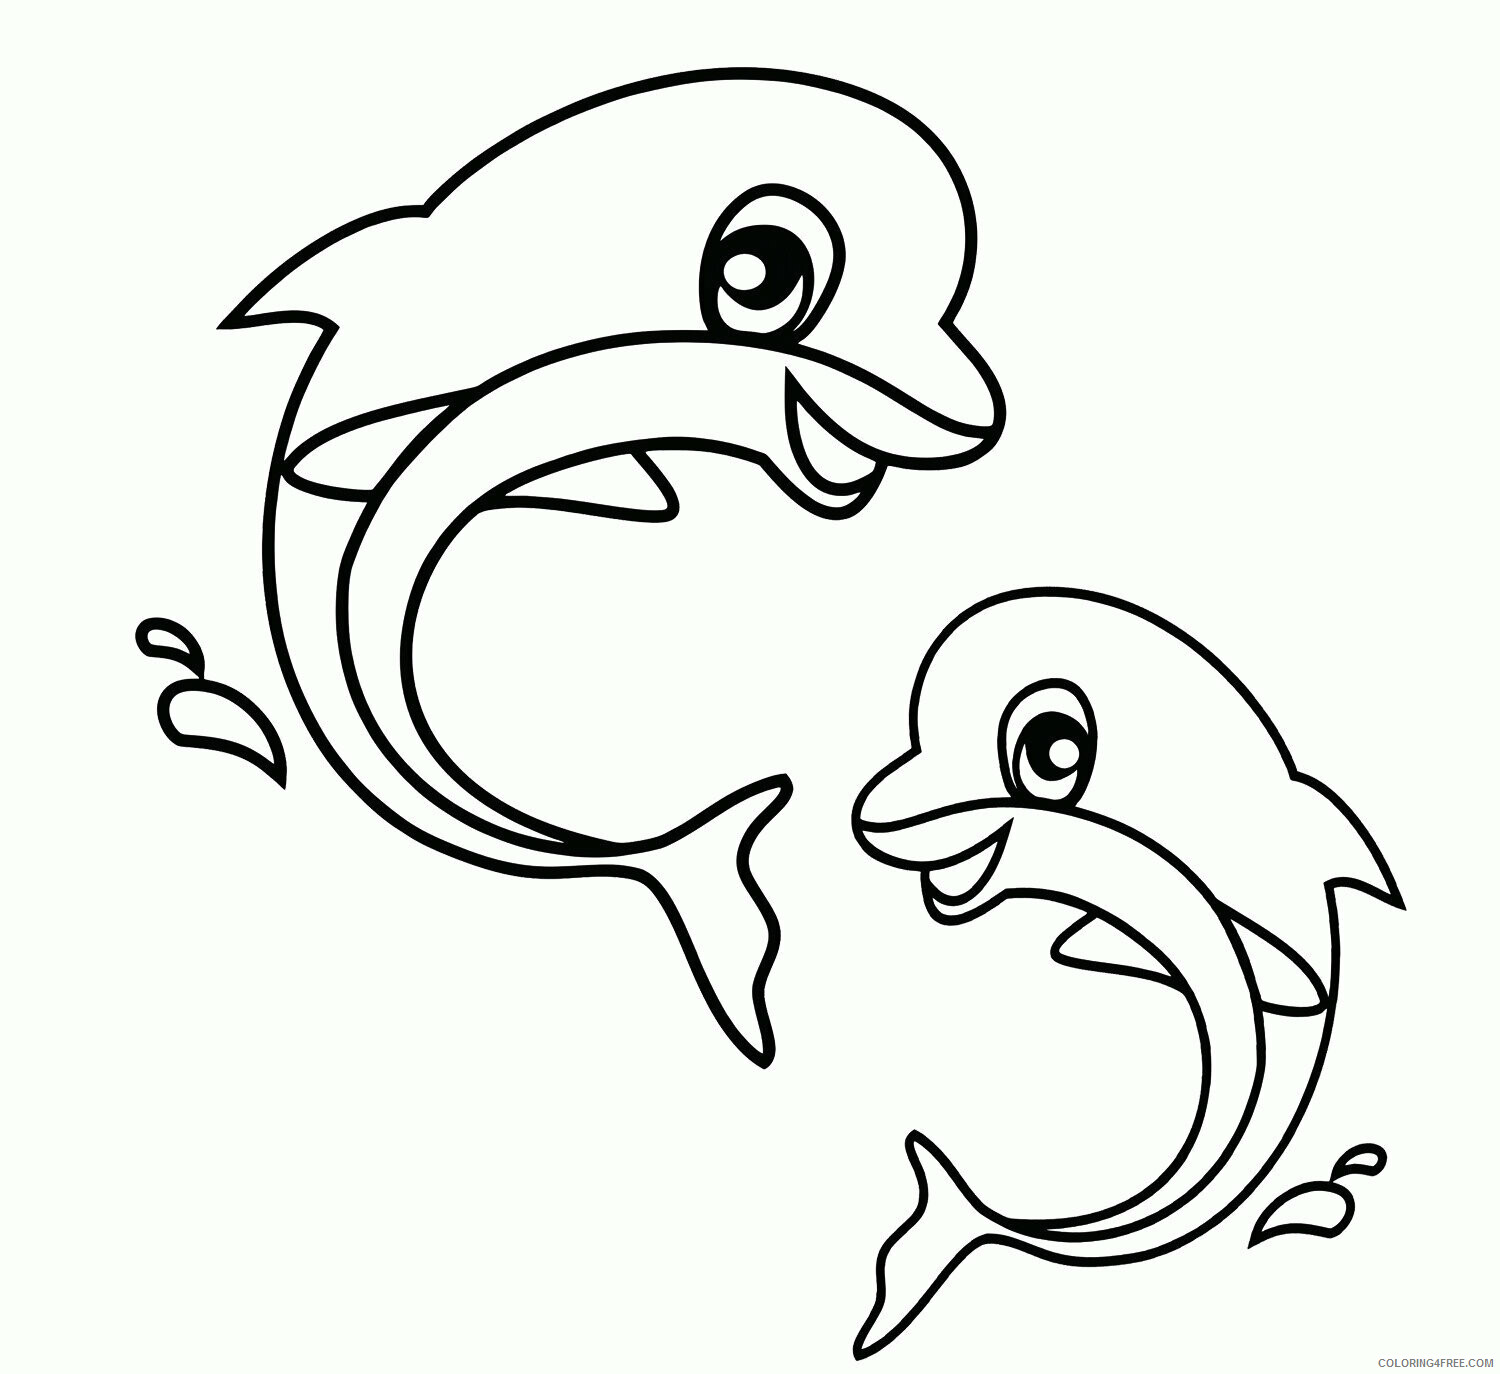 Download Animals Kids Coloring Pages Printable Sheets animal for preschoolers 2021 a 1016 Coloring4free ...